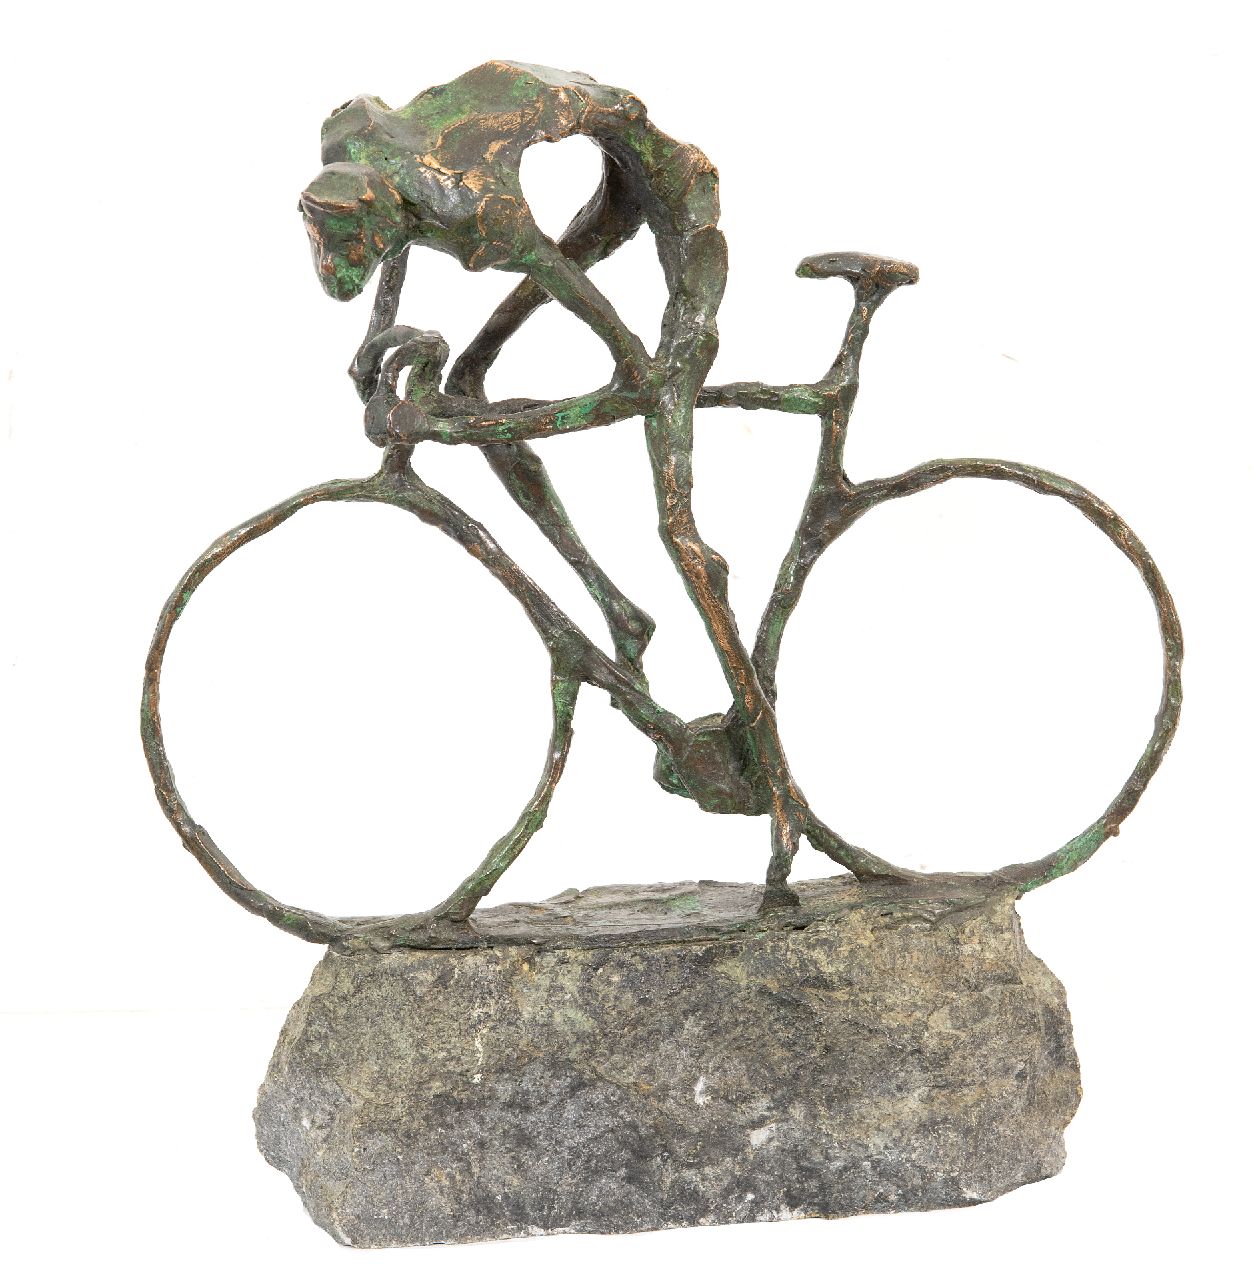 Bakker W.F.  | Willem Frederik 'Jits' Bakker | Sculptures and objects offered for sale | The Tour Rider, bronze 31.4 x 28.6 cm, signed on the base